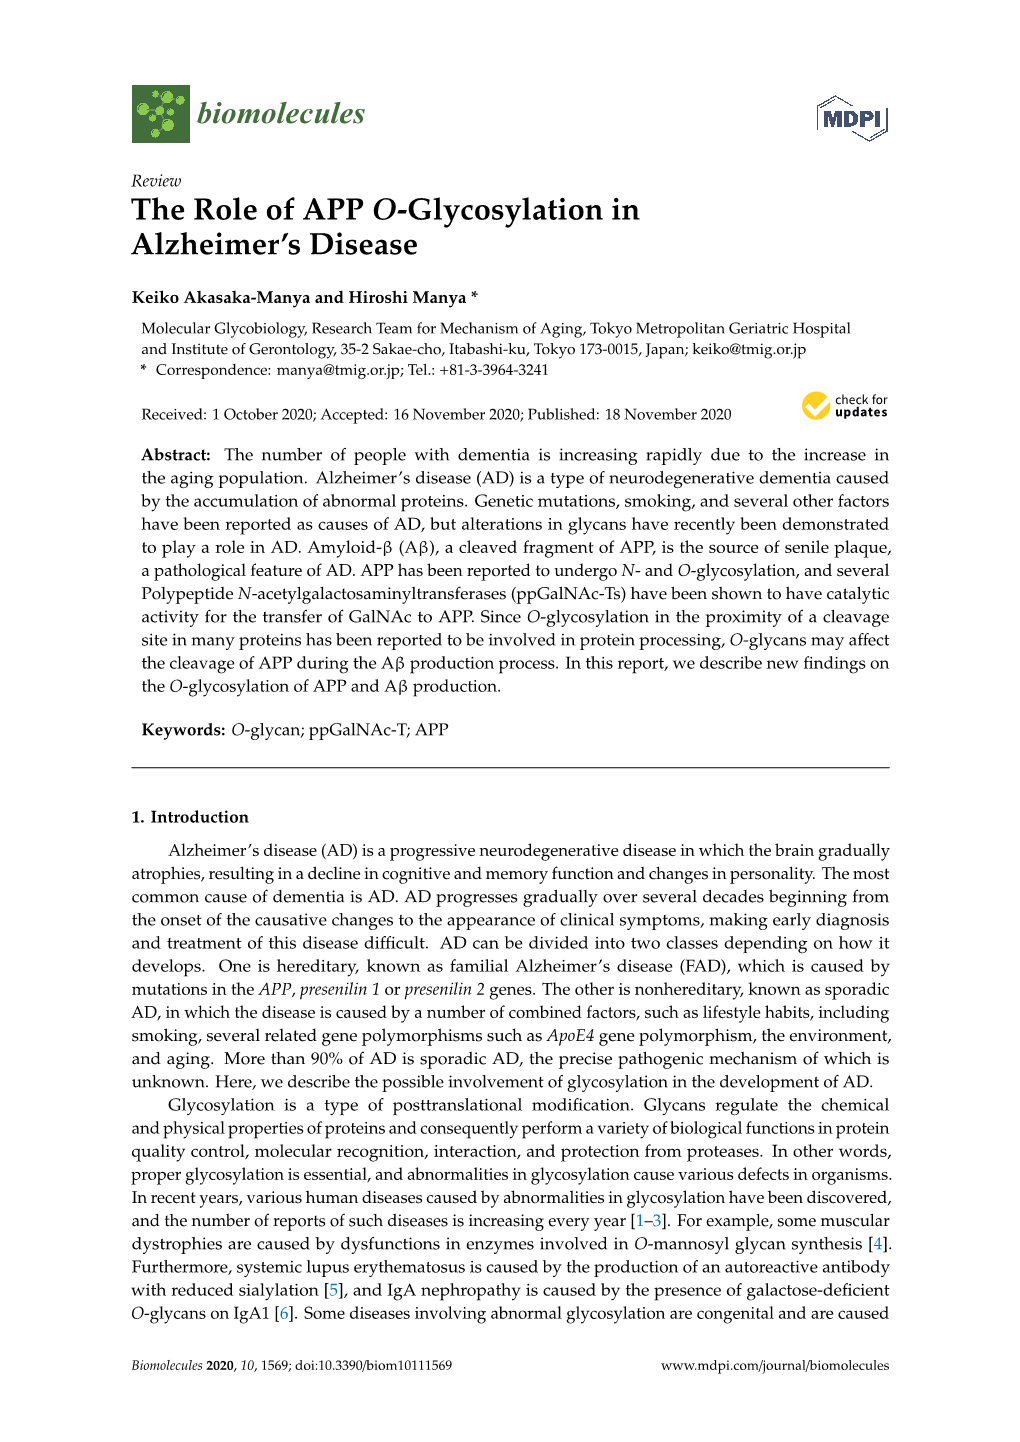 The Role of APP O-Glycosylation in Alzheimer's Disease